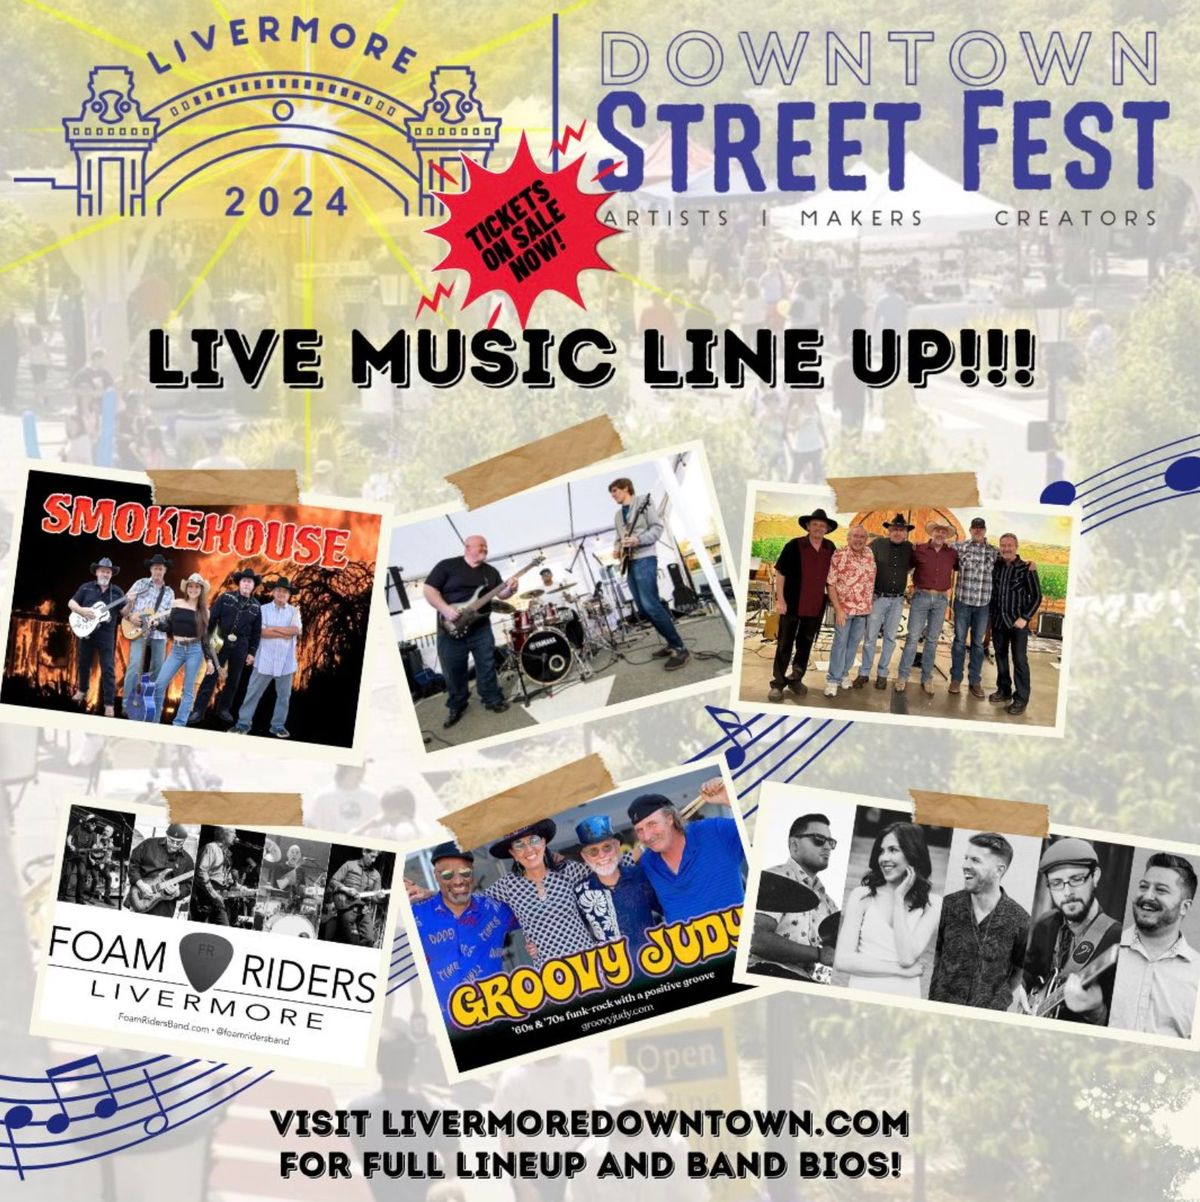 Livermore Downtown Street Fest!